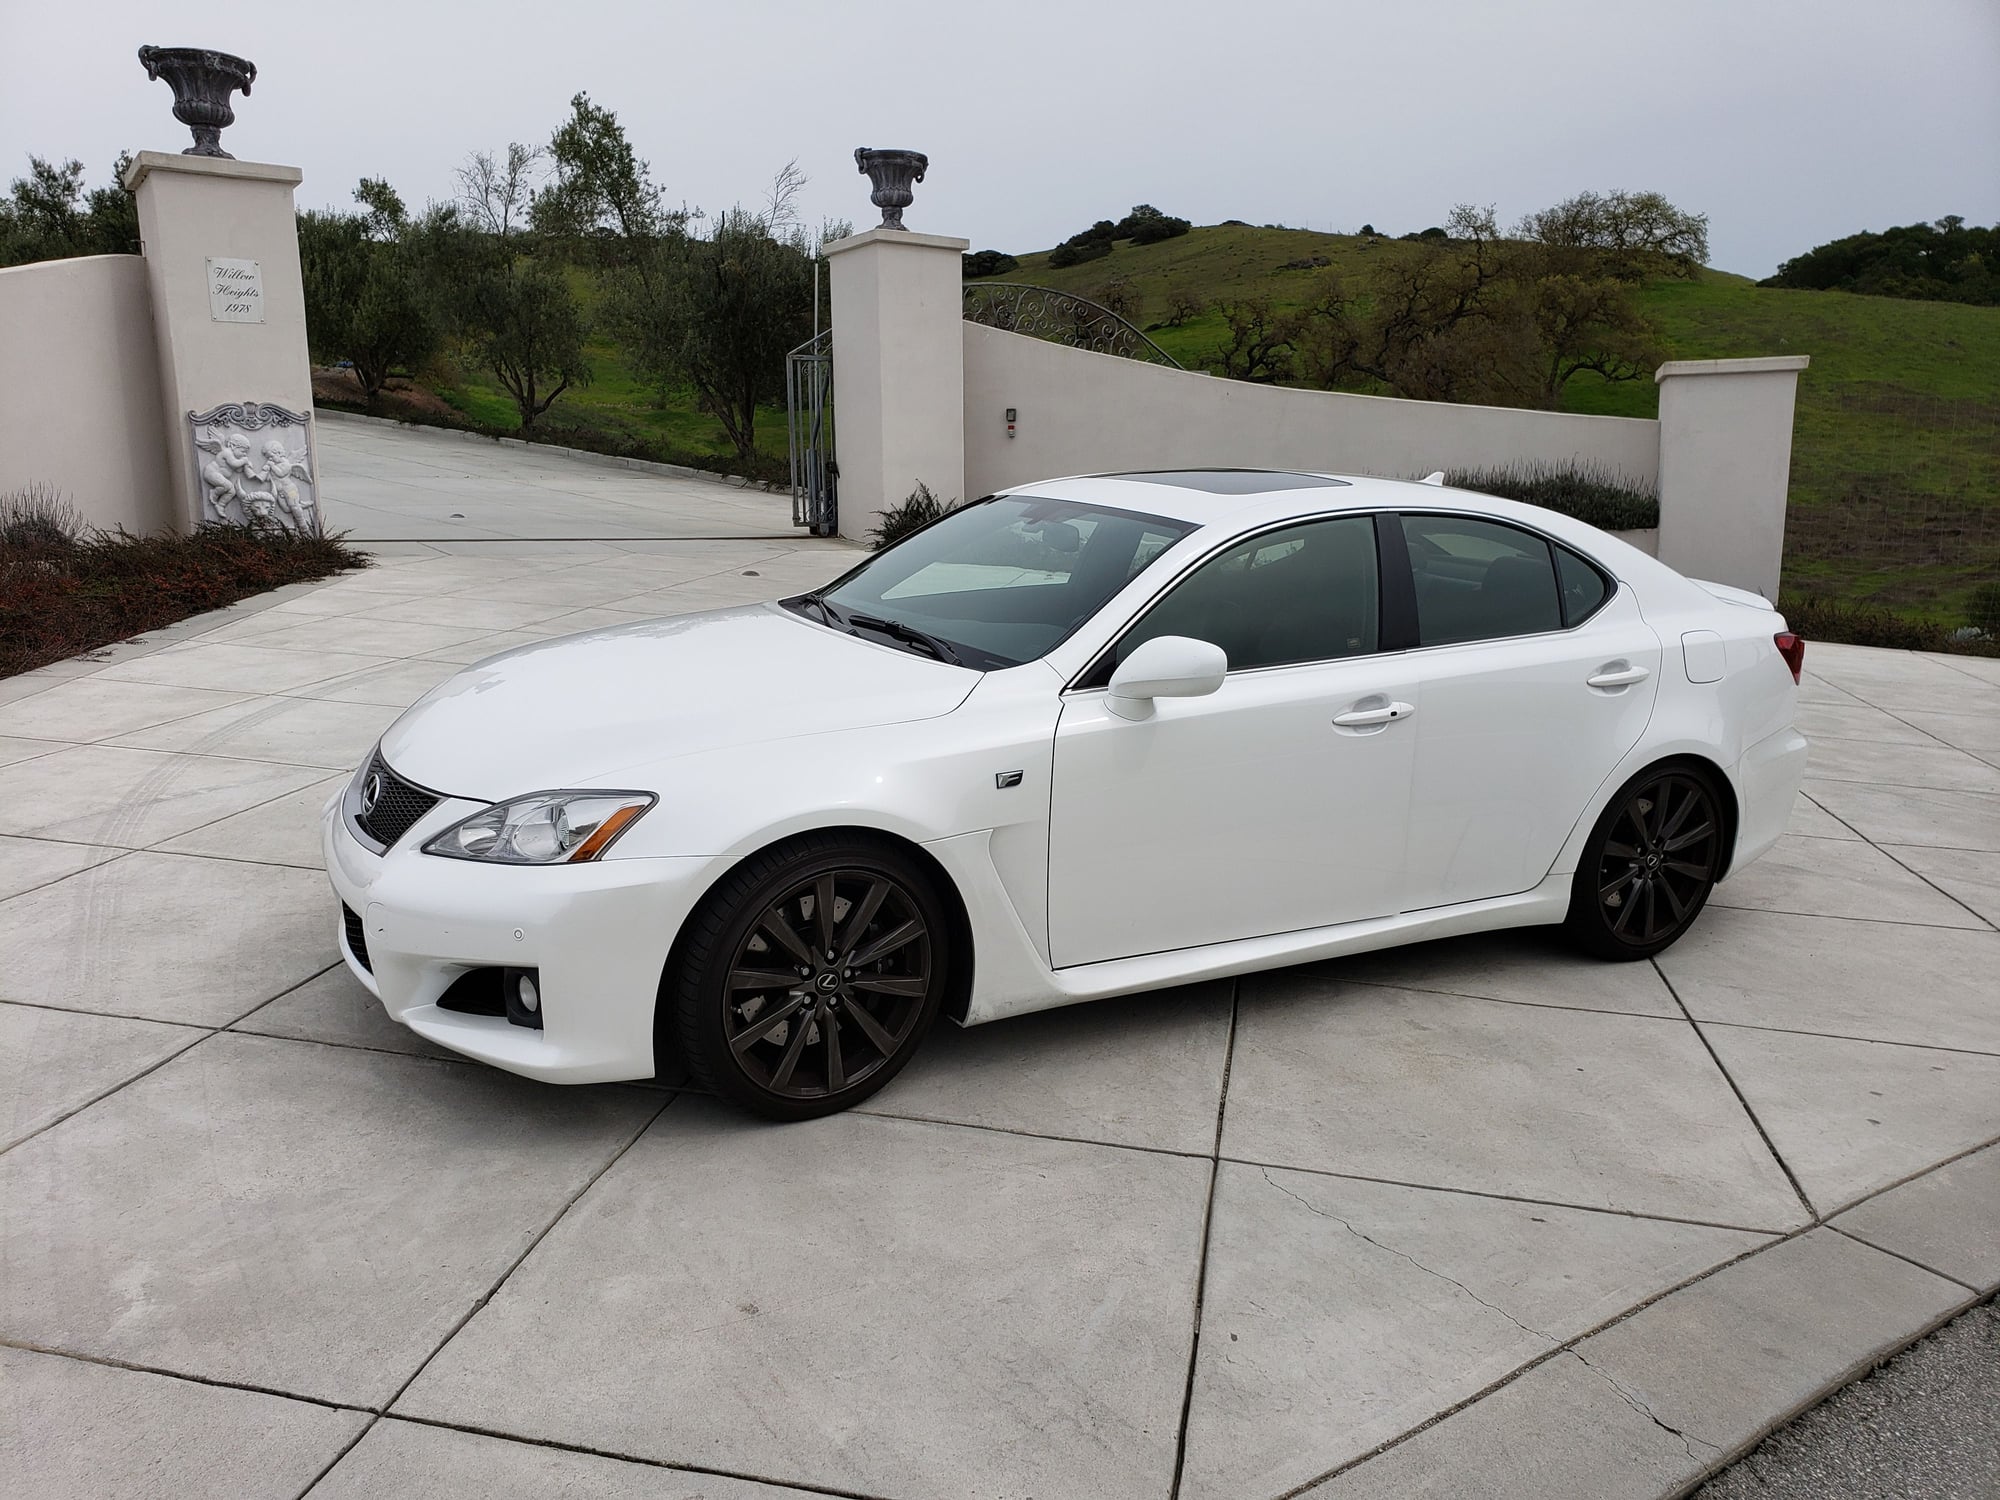 2008 Lexus IS F - 2008 ISF w/2100 Original Miles - Original Owner in Original New Condition - New - VIN JTHBP262185001275 - 2,100 Miles - 8 cyl - 2WD - Automatic - Sedan - White - Morgan Hill, CA 95037, United States